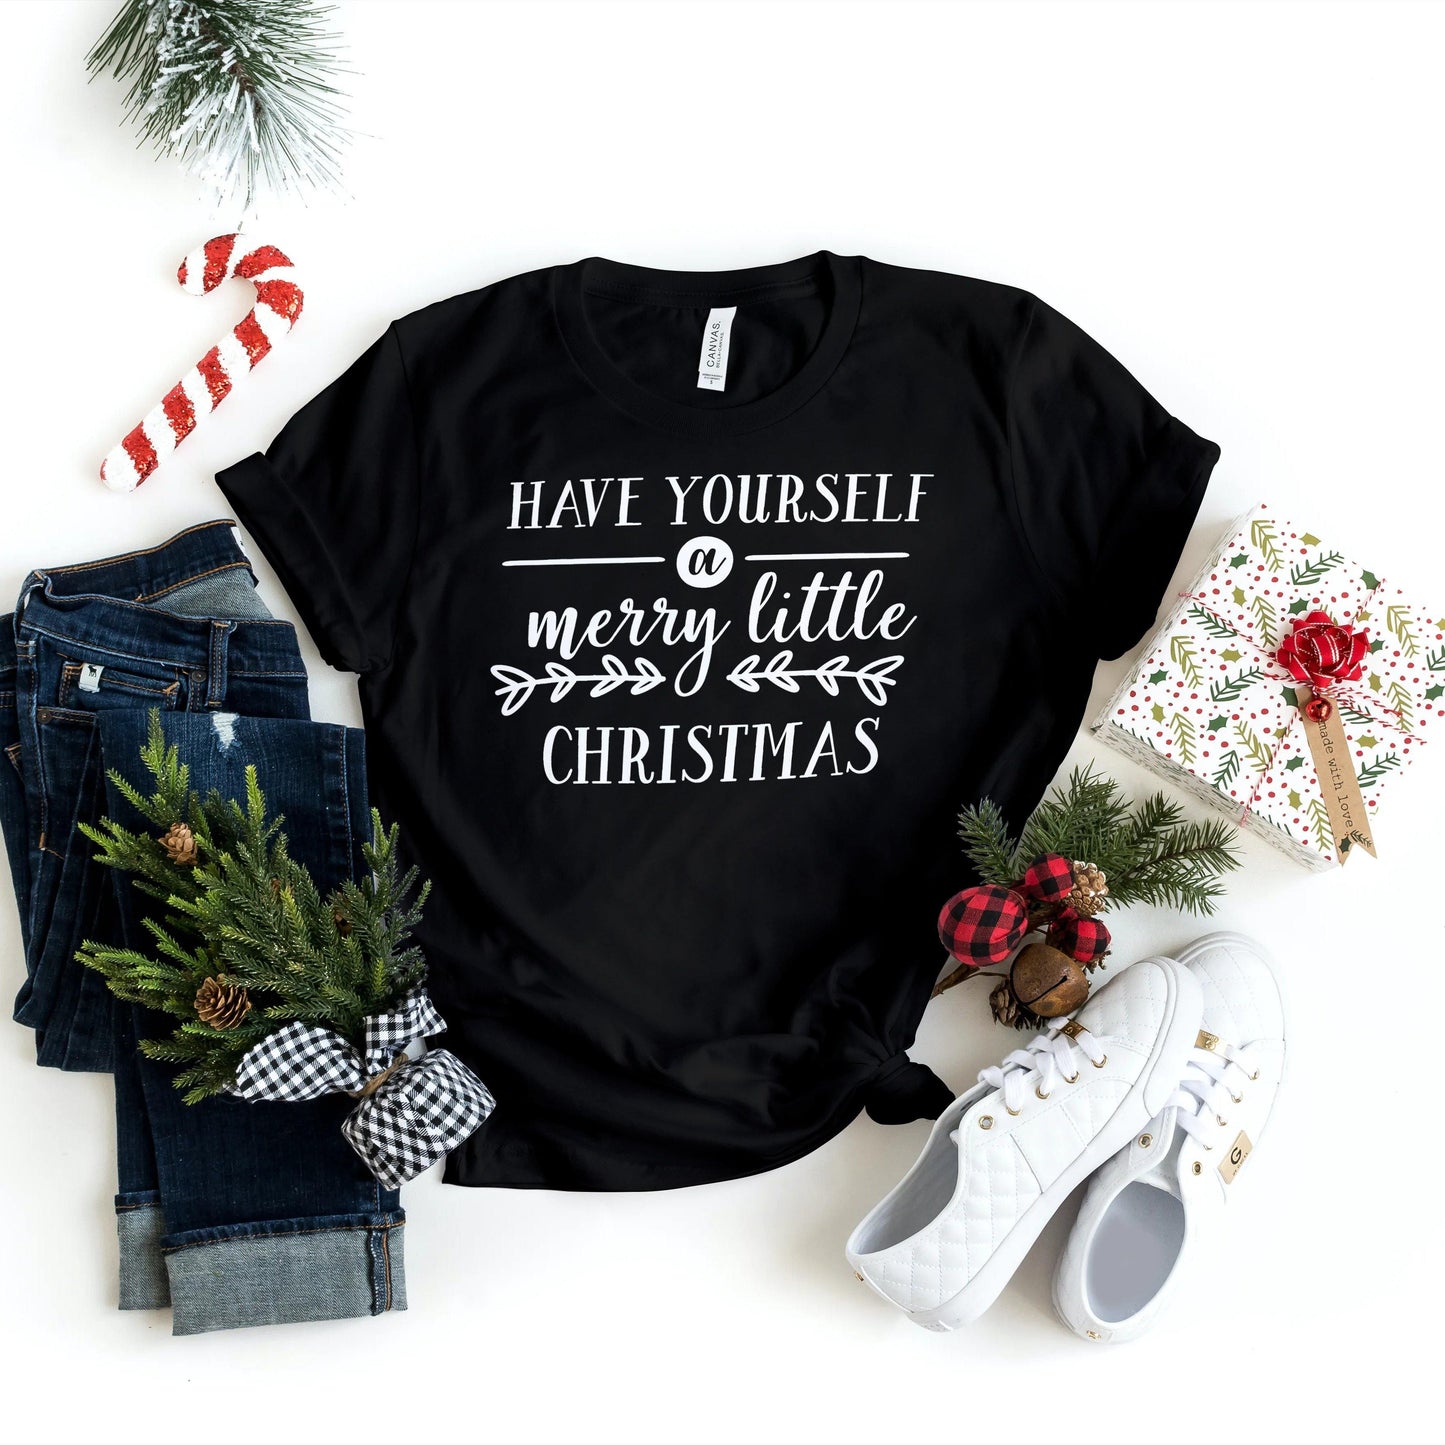 Christmas Shirts - Have Yourself a Merry Little Christmas 2 - Holiday Shirts - Gifts - Healthy Wealthy Skinny